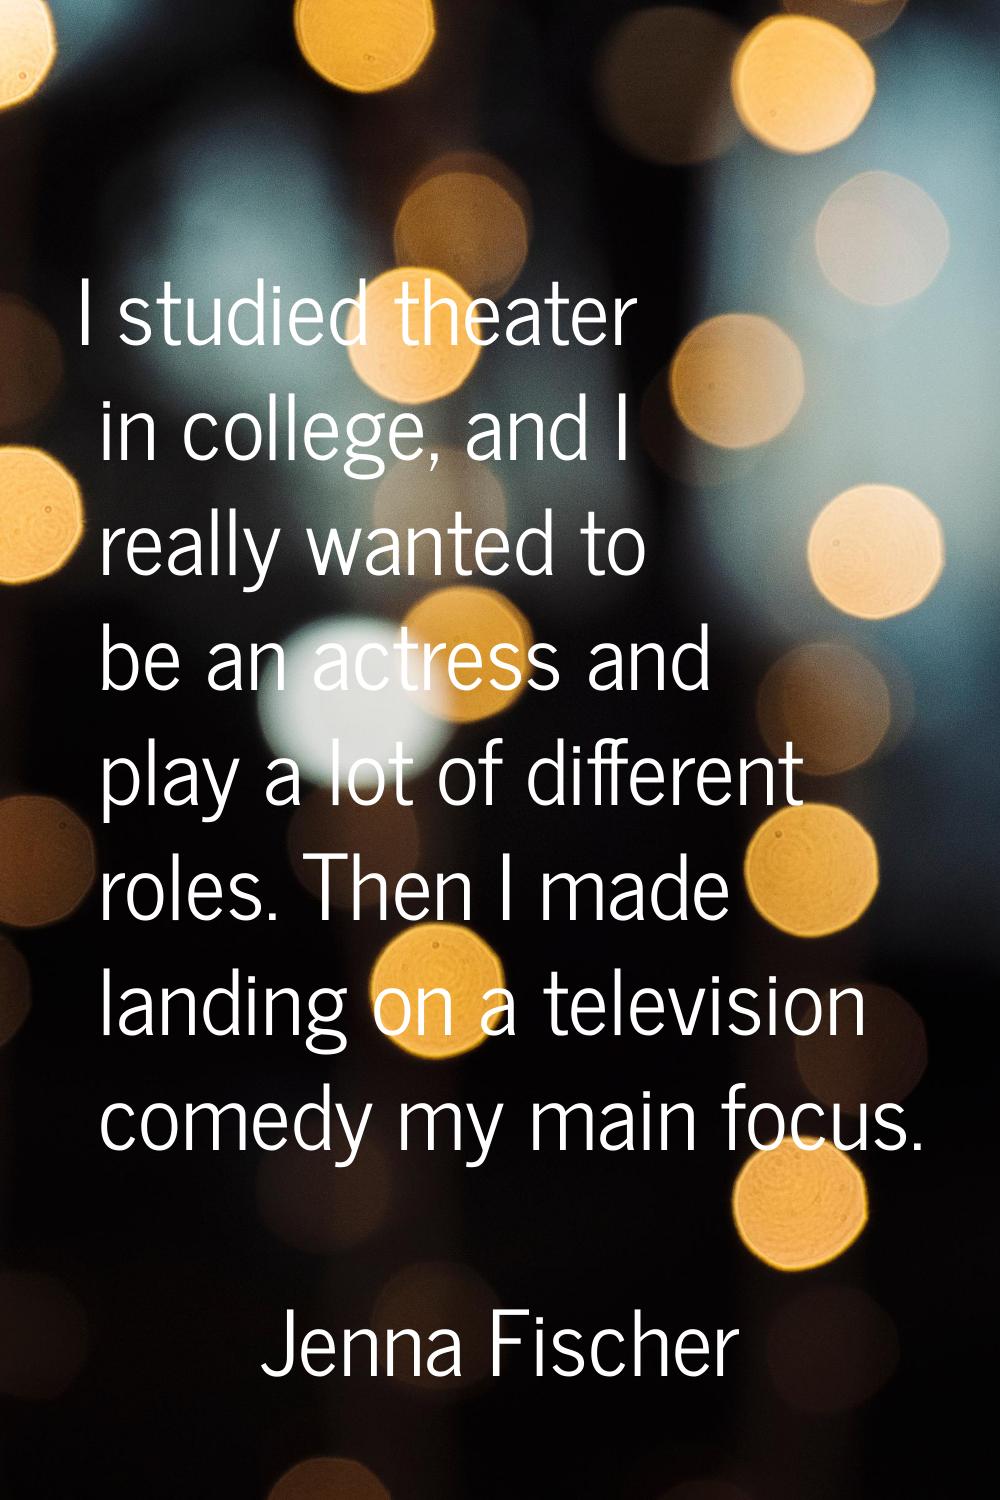 I studied theater in college, and I really wanted to be an actress and play a lot of different role